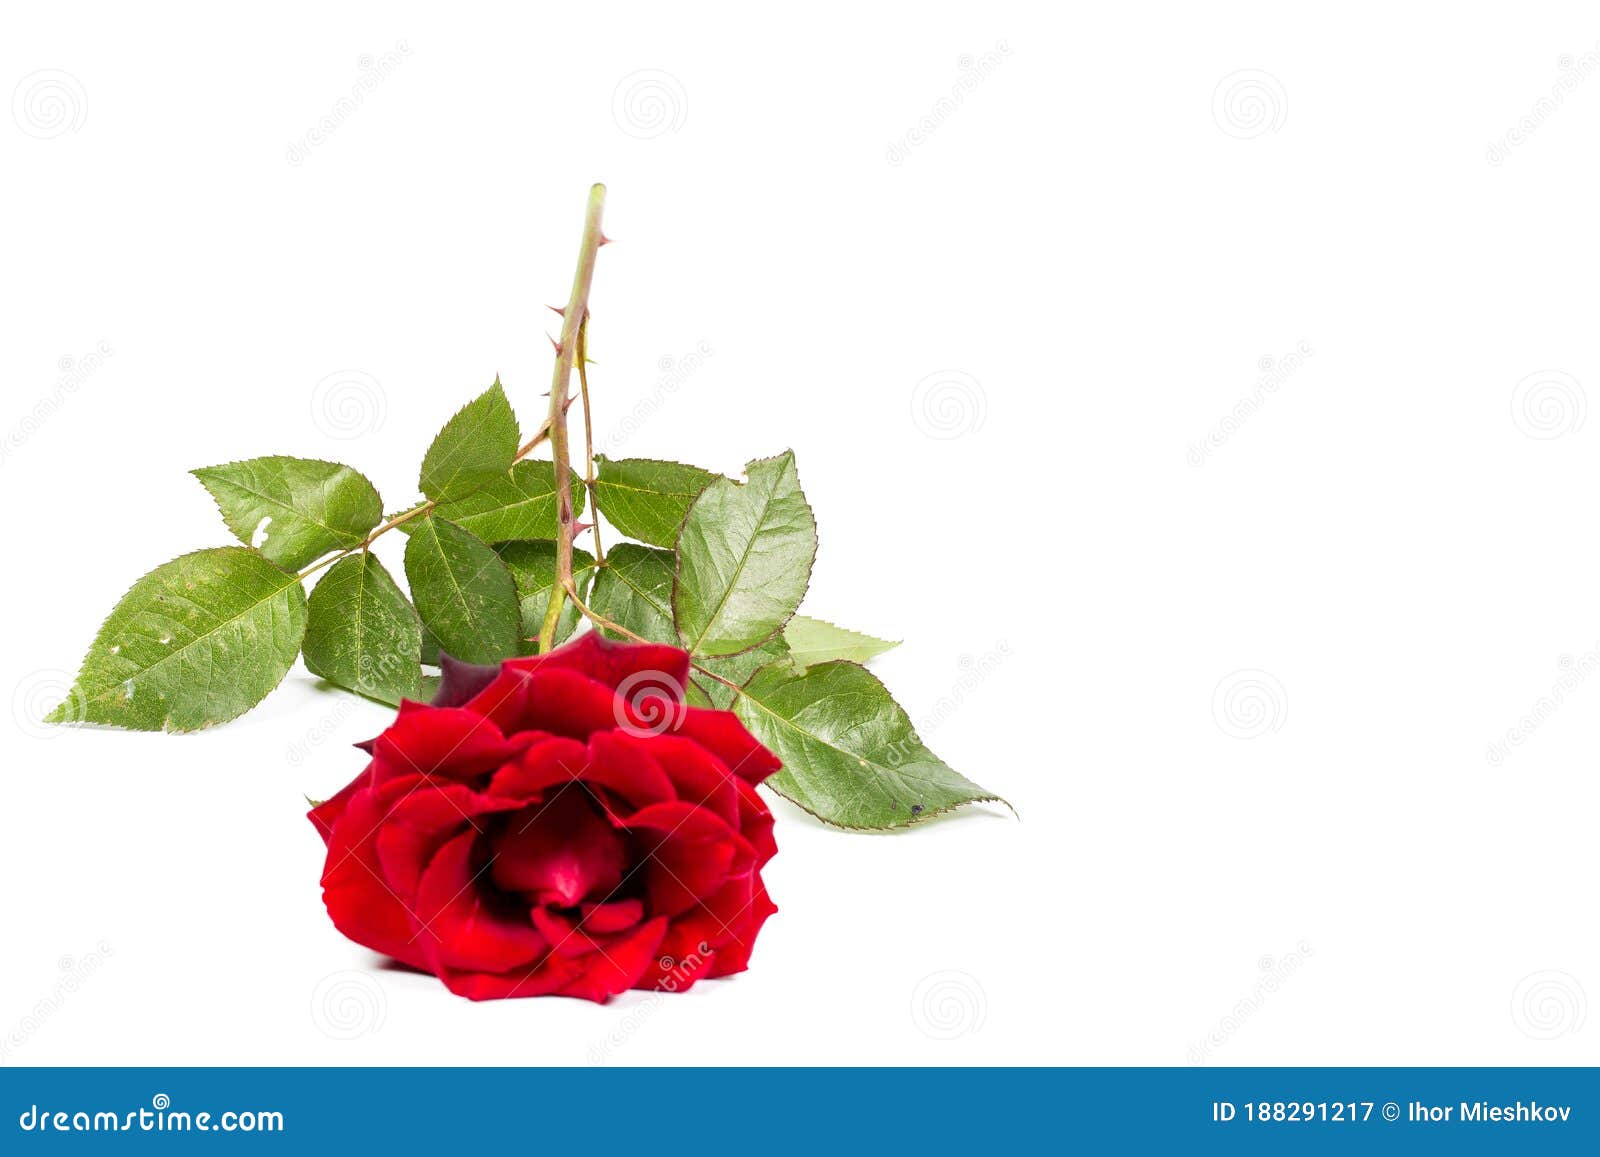 Beautiful Red Rose with Green Leaves on a White Background, for Gift or ...